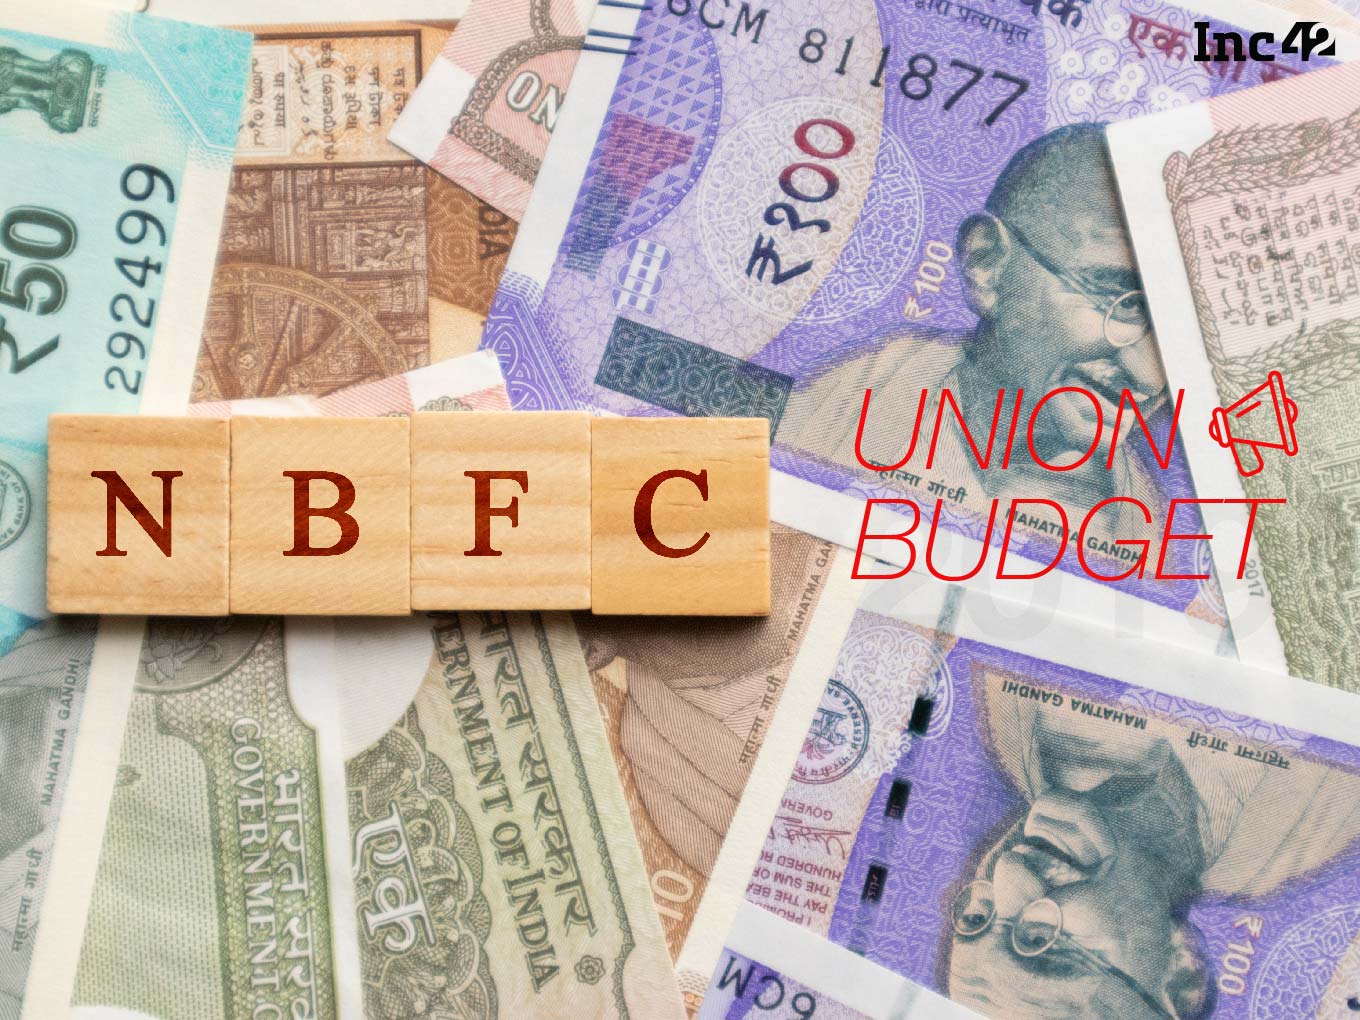 Union Budget 2019: NBFC Gets A Breath From N Sitharaman Budget